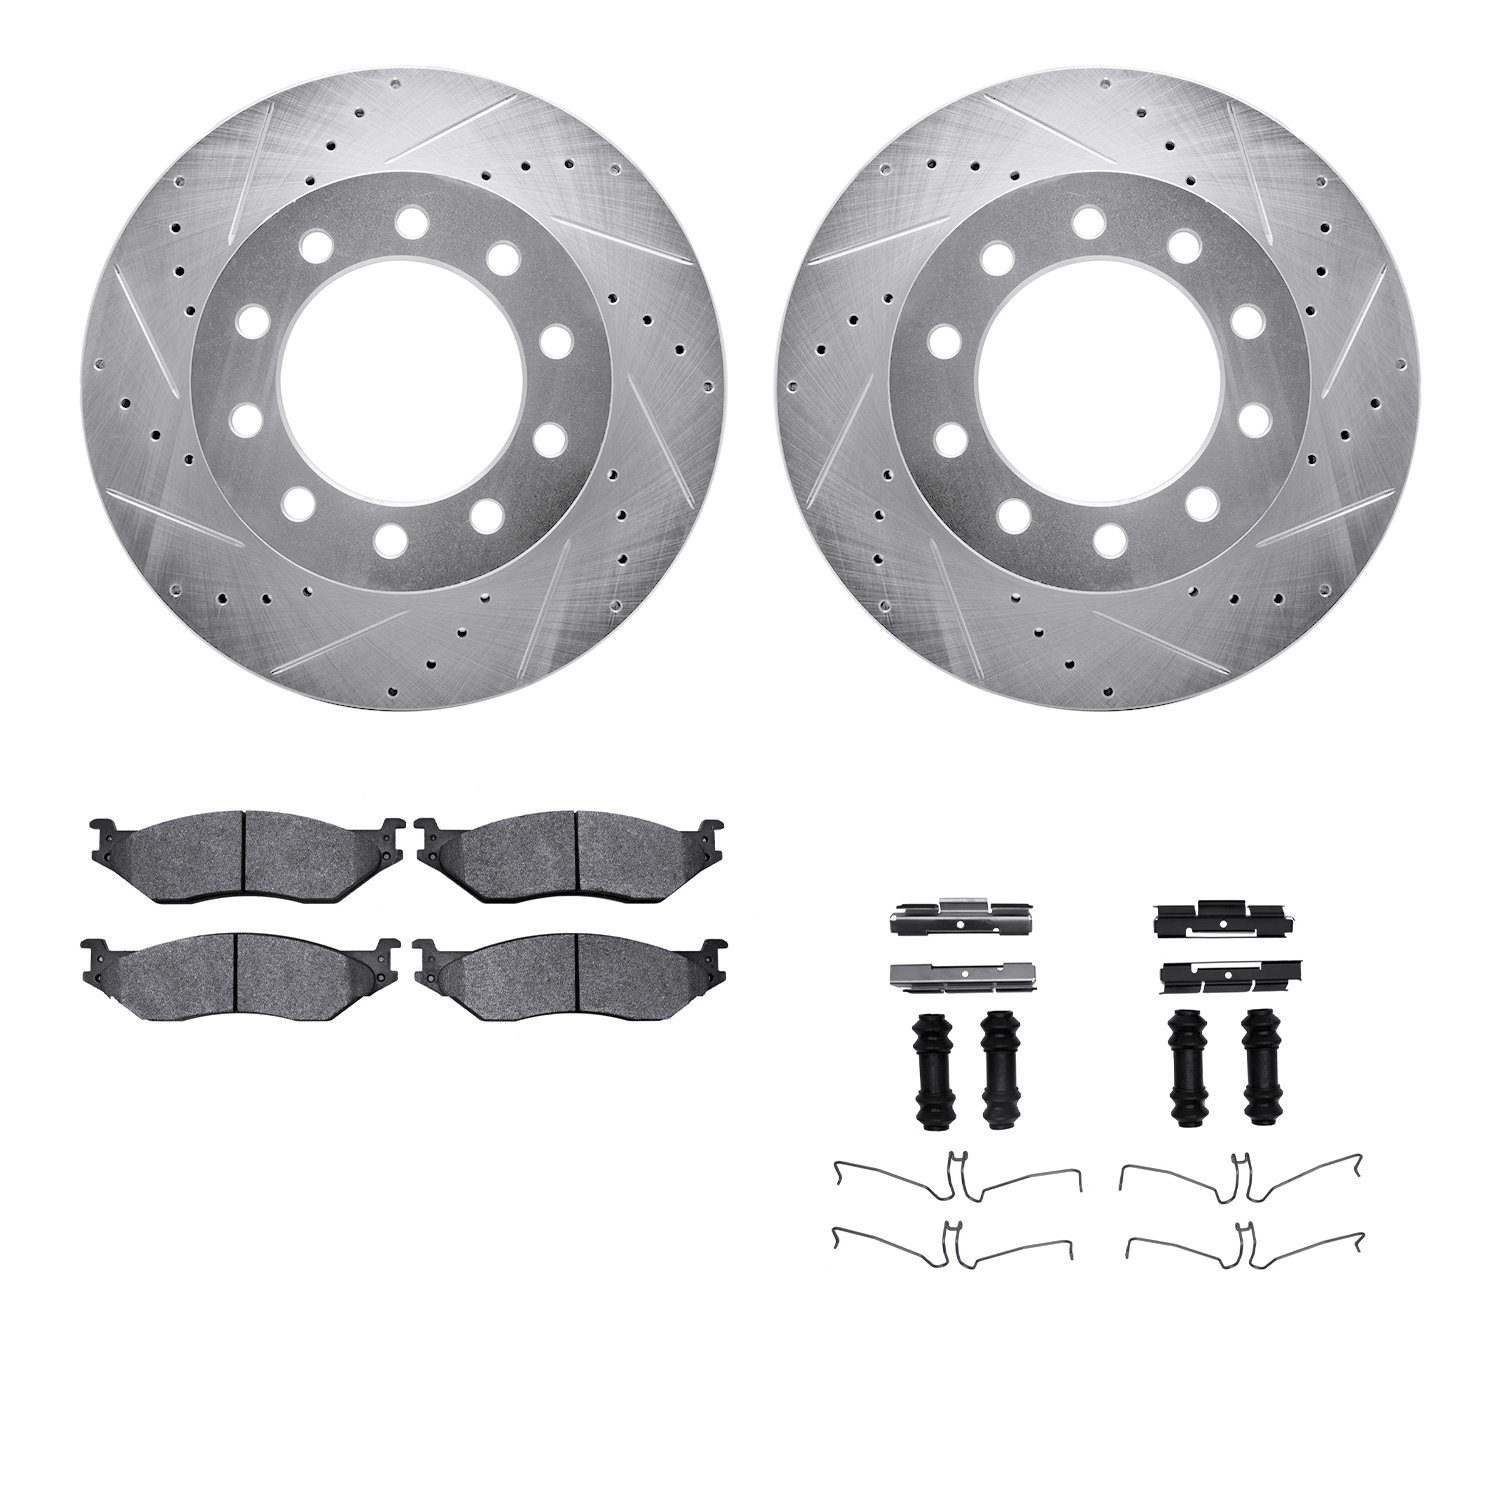 7412-54080 Drilled/Slotted Brake Rotors with Ultimate-Duty Brake Pads Kit & Hardware [Silver], 2005-2016 Ford/Lincoln/Mercury/Ma